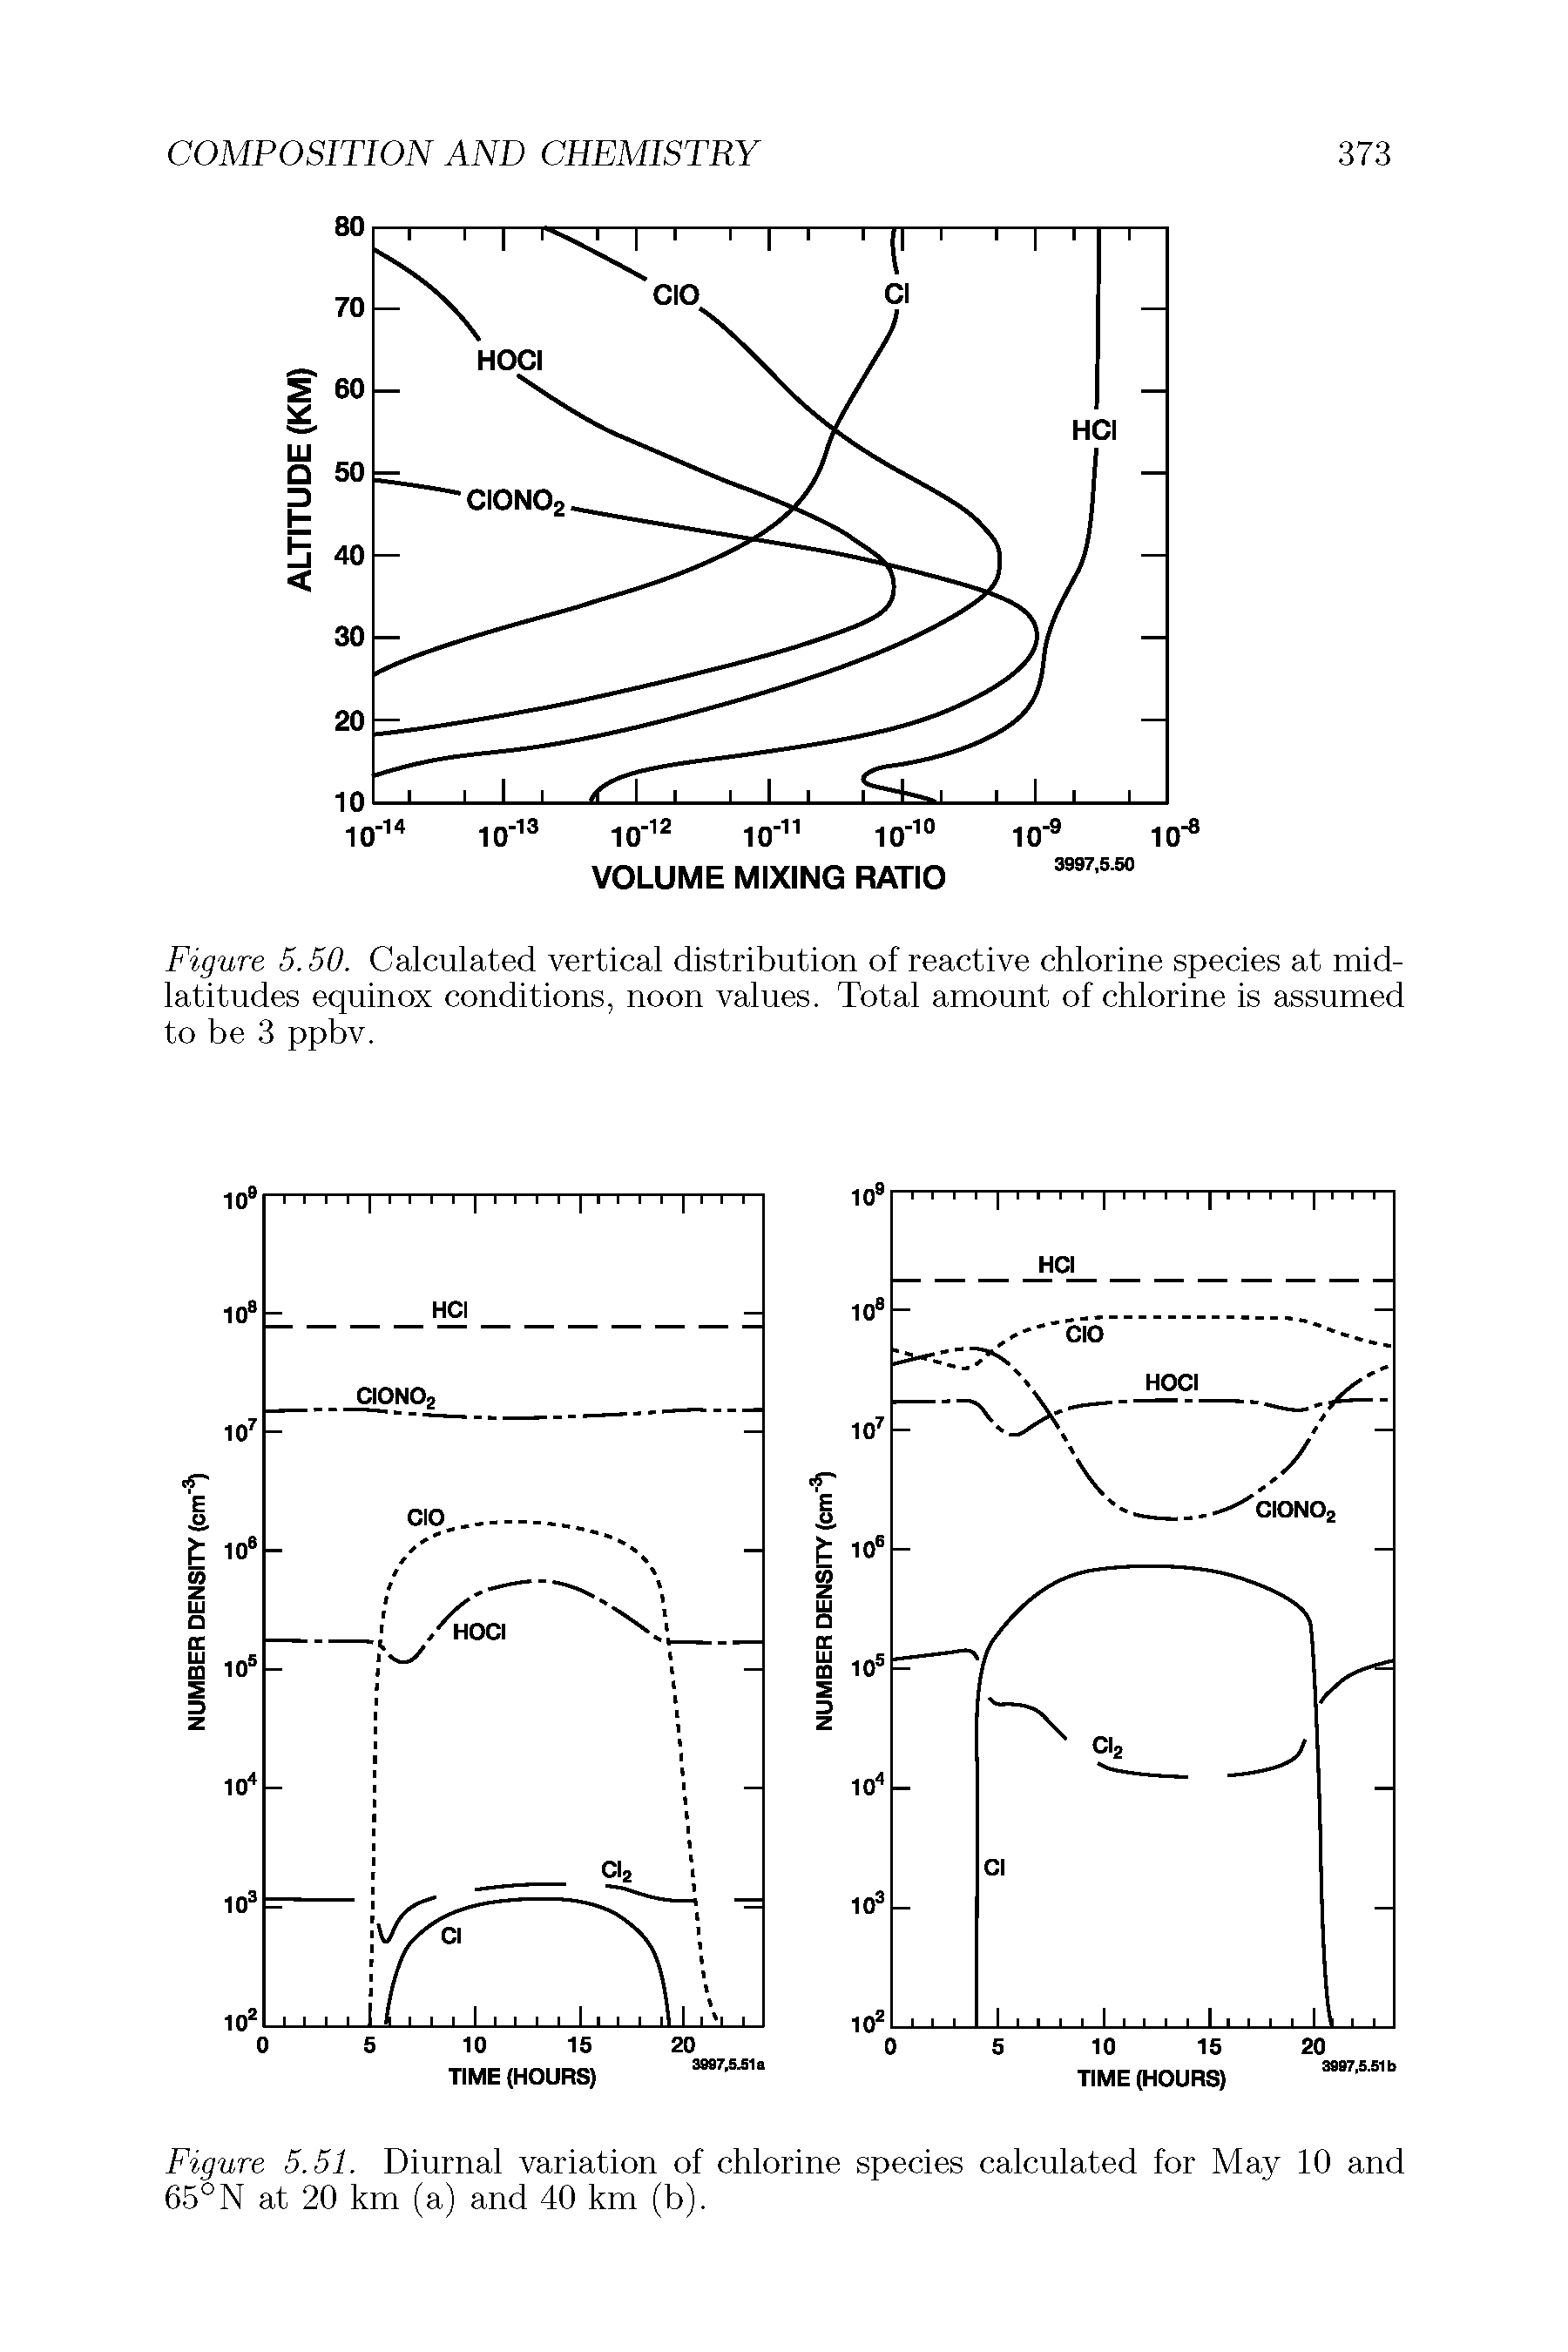 Figure 5.50. Calculated vertical distribution of reactive chlorine species at midlatitudes equinox conditions, noon values. Total amount of chlorine is assumed to be 3 ppbv.